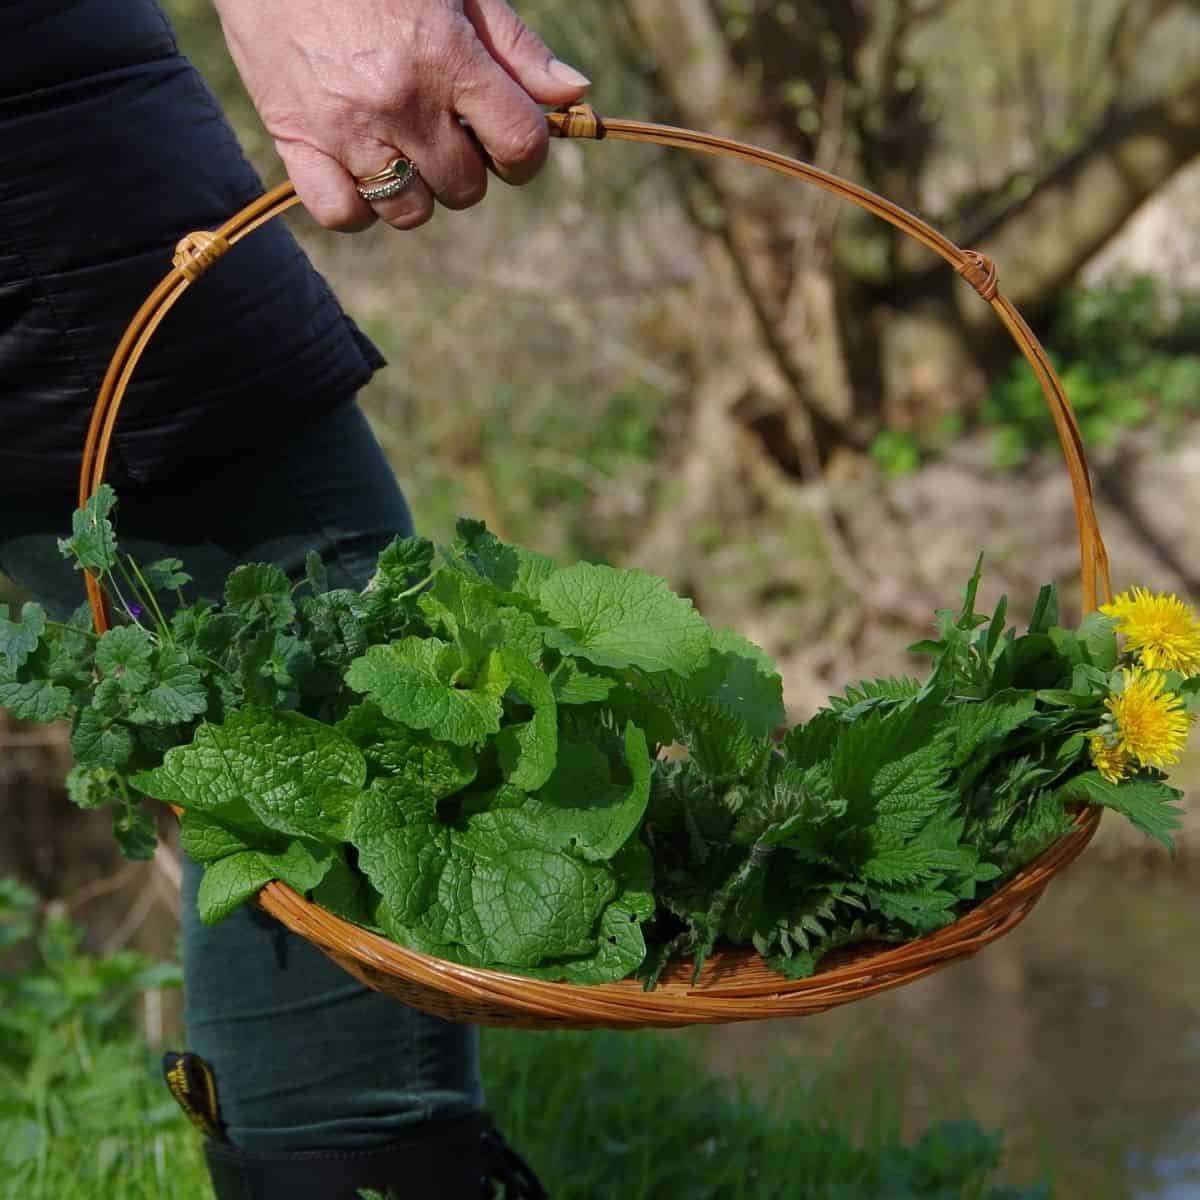 Hand holding a whicker basket containing foraged dandelion, ground ivy, garlic mustard and nettle.